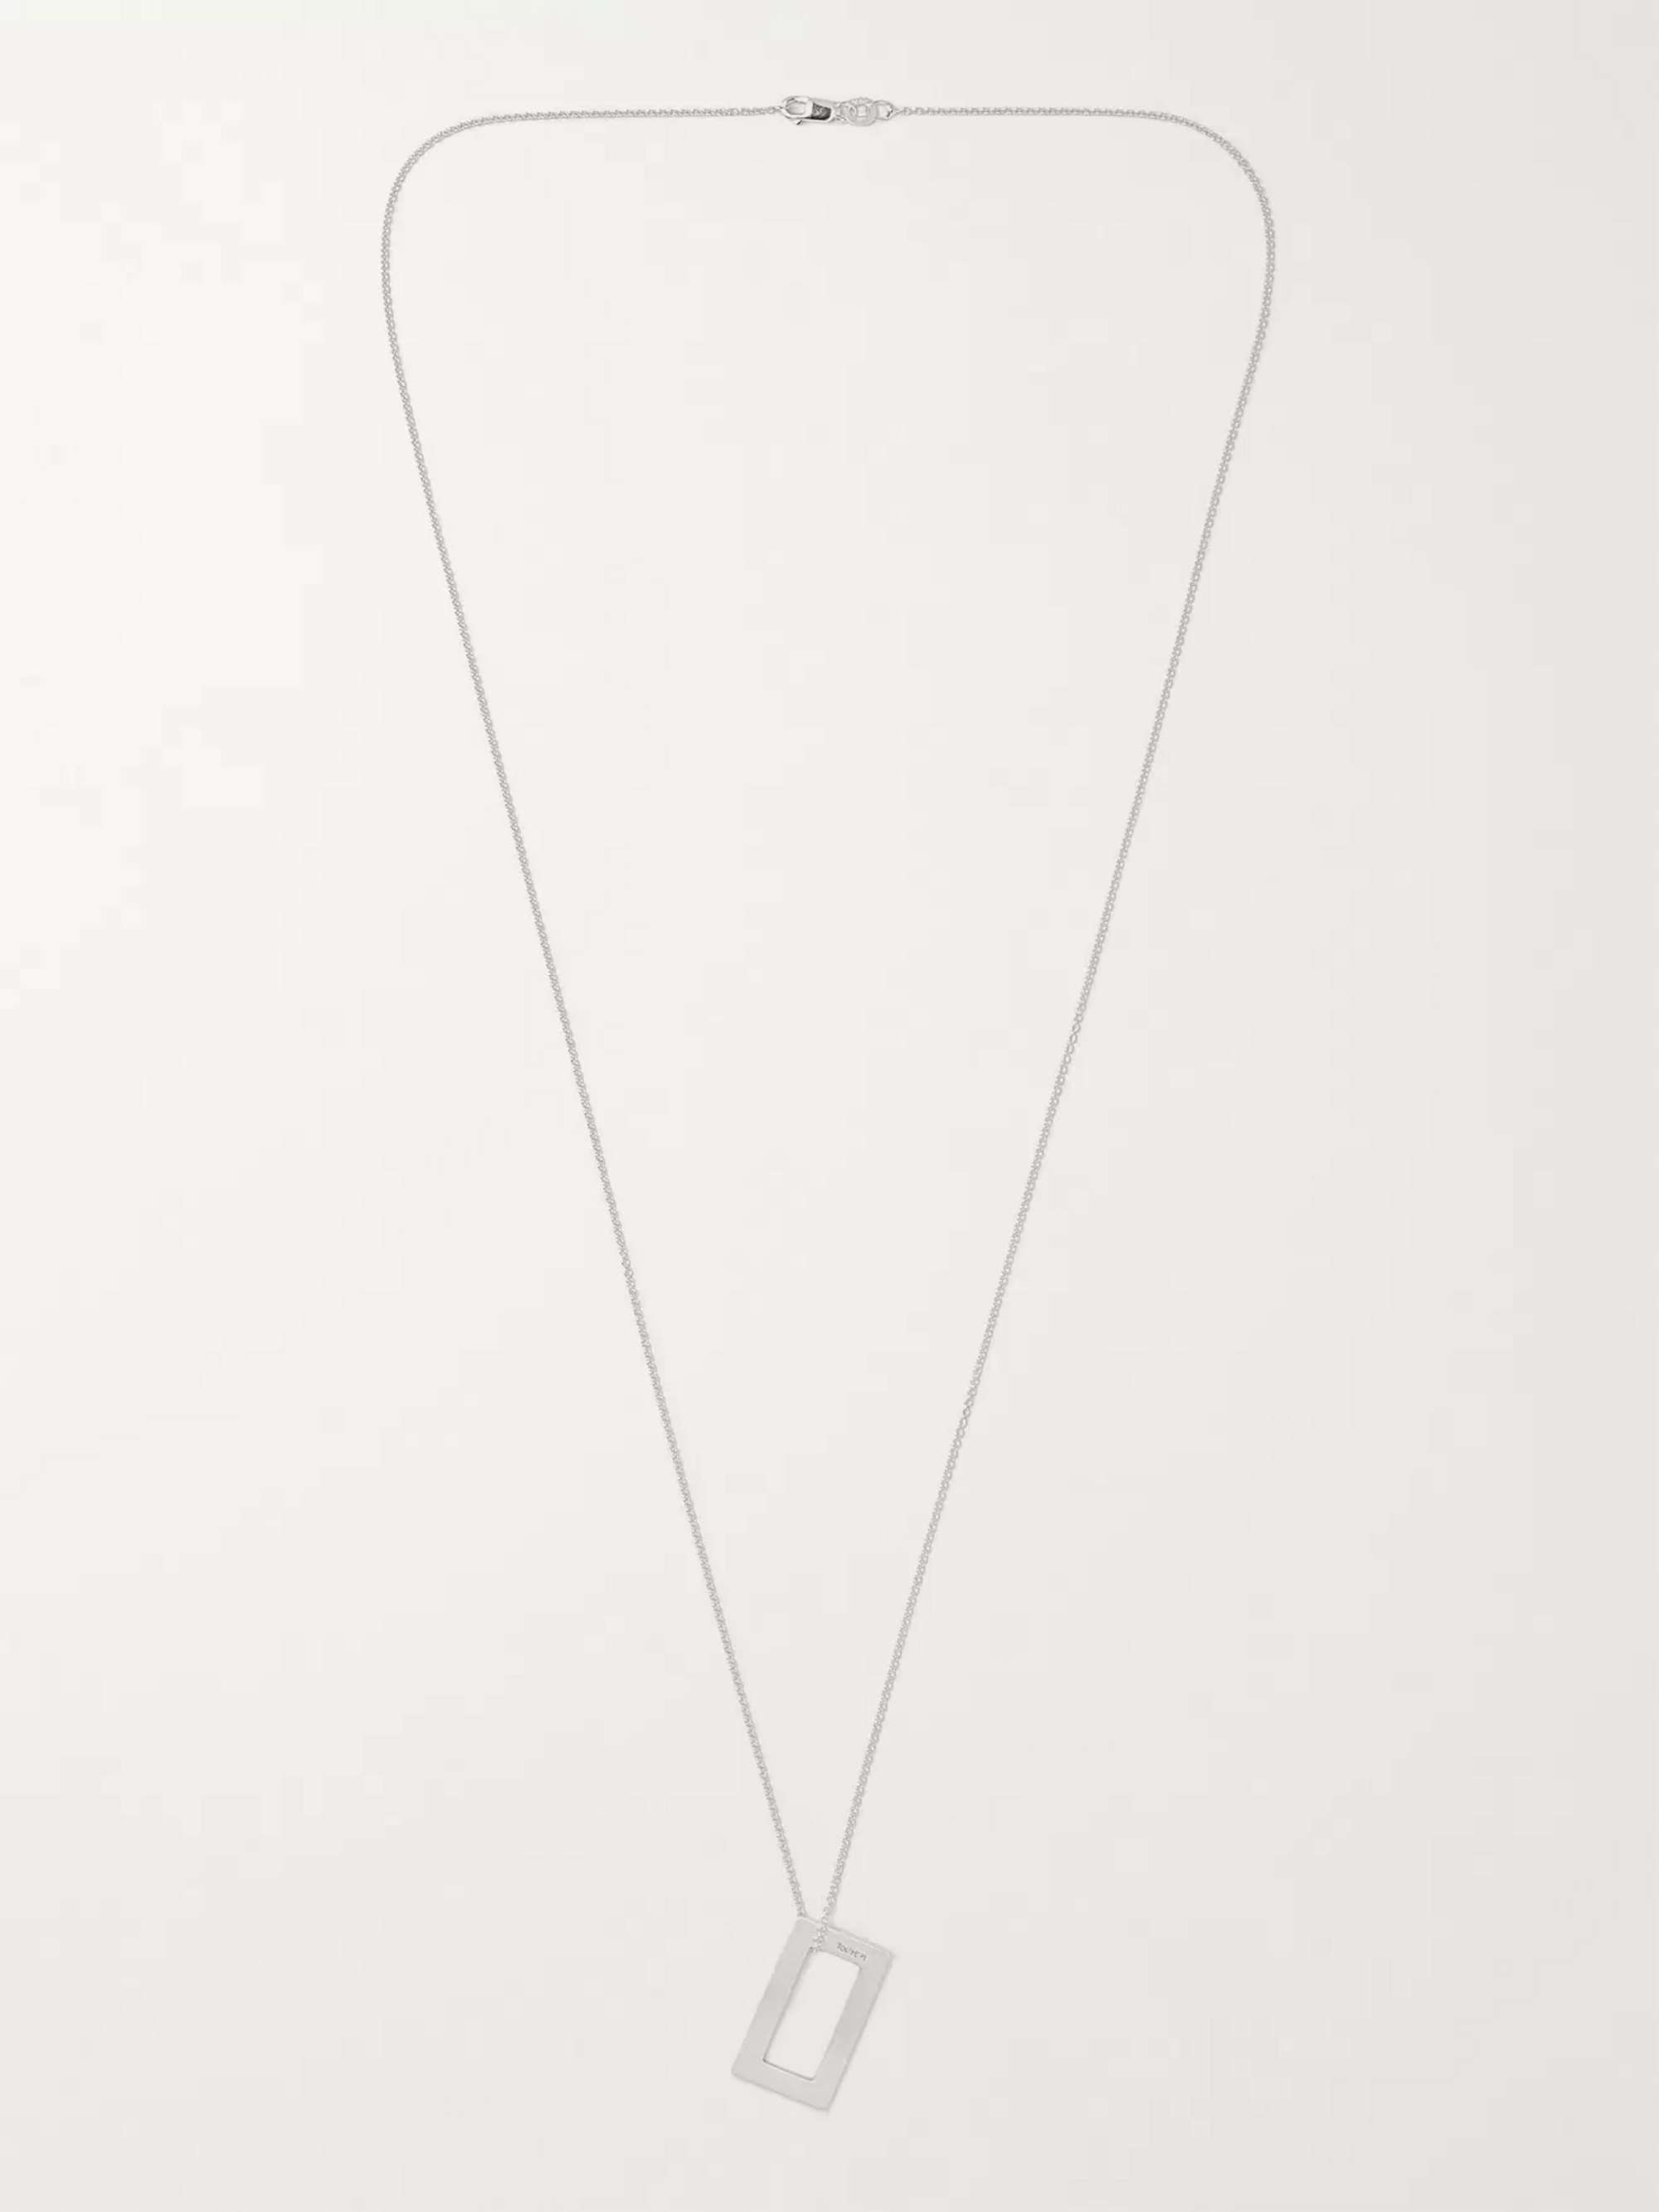 LE GRAMME 34/10ths Sterling Silver Necklace